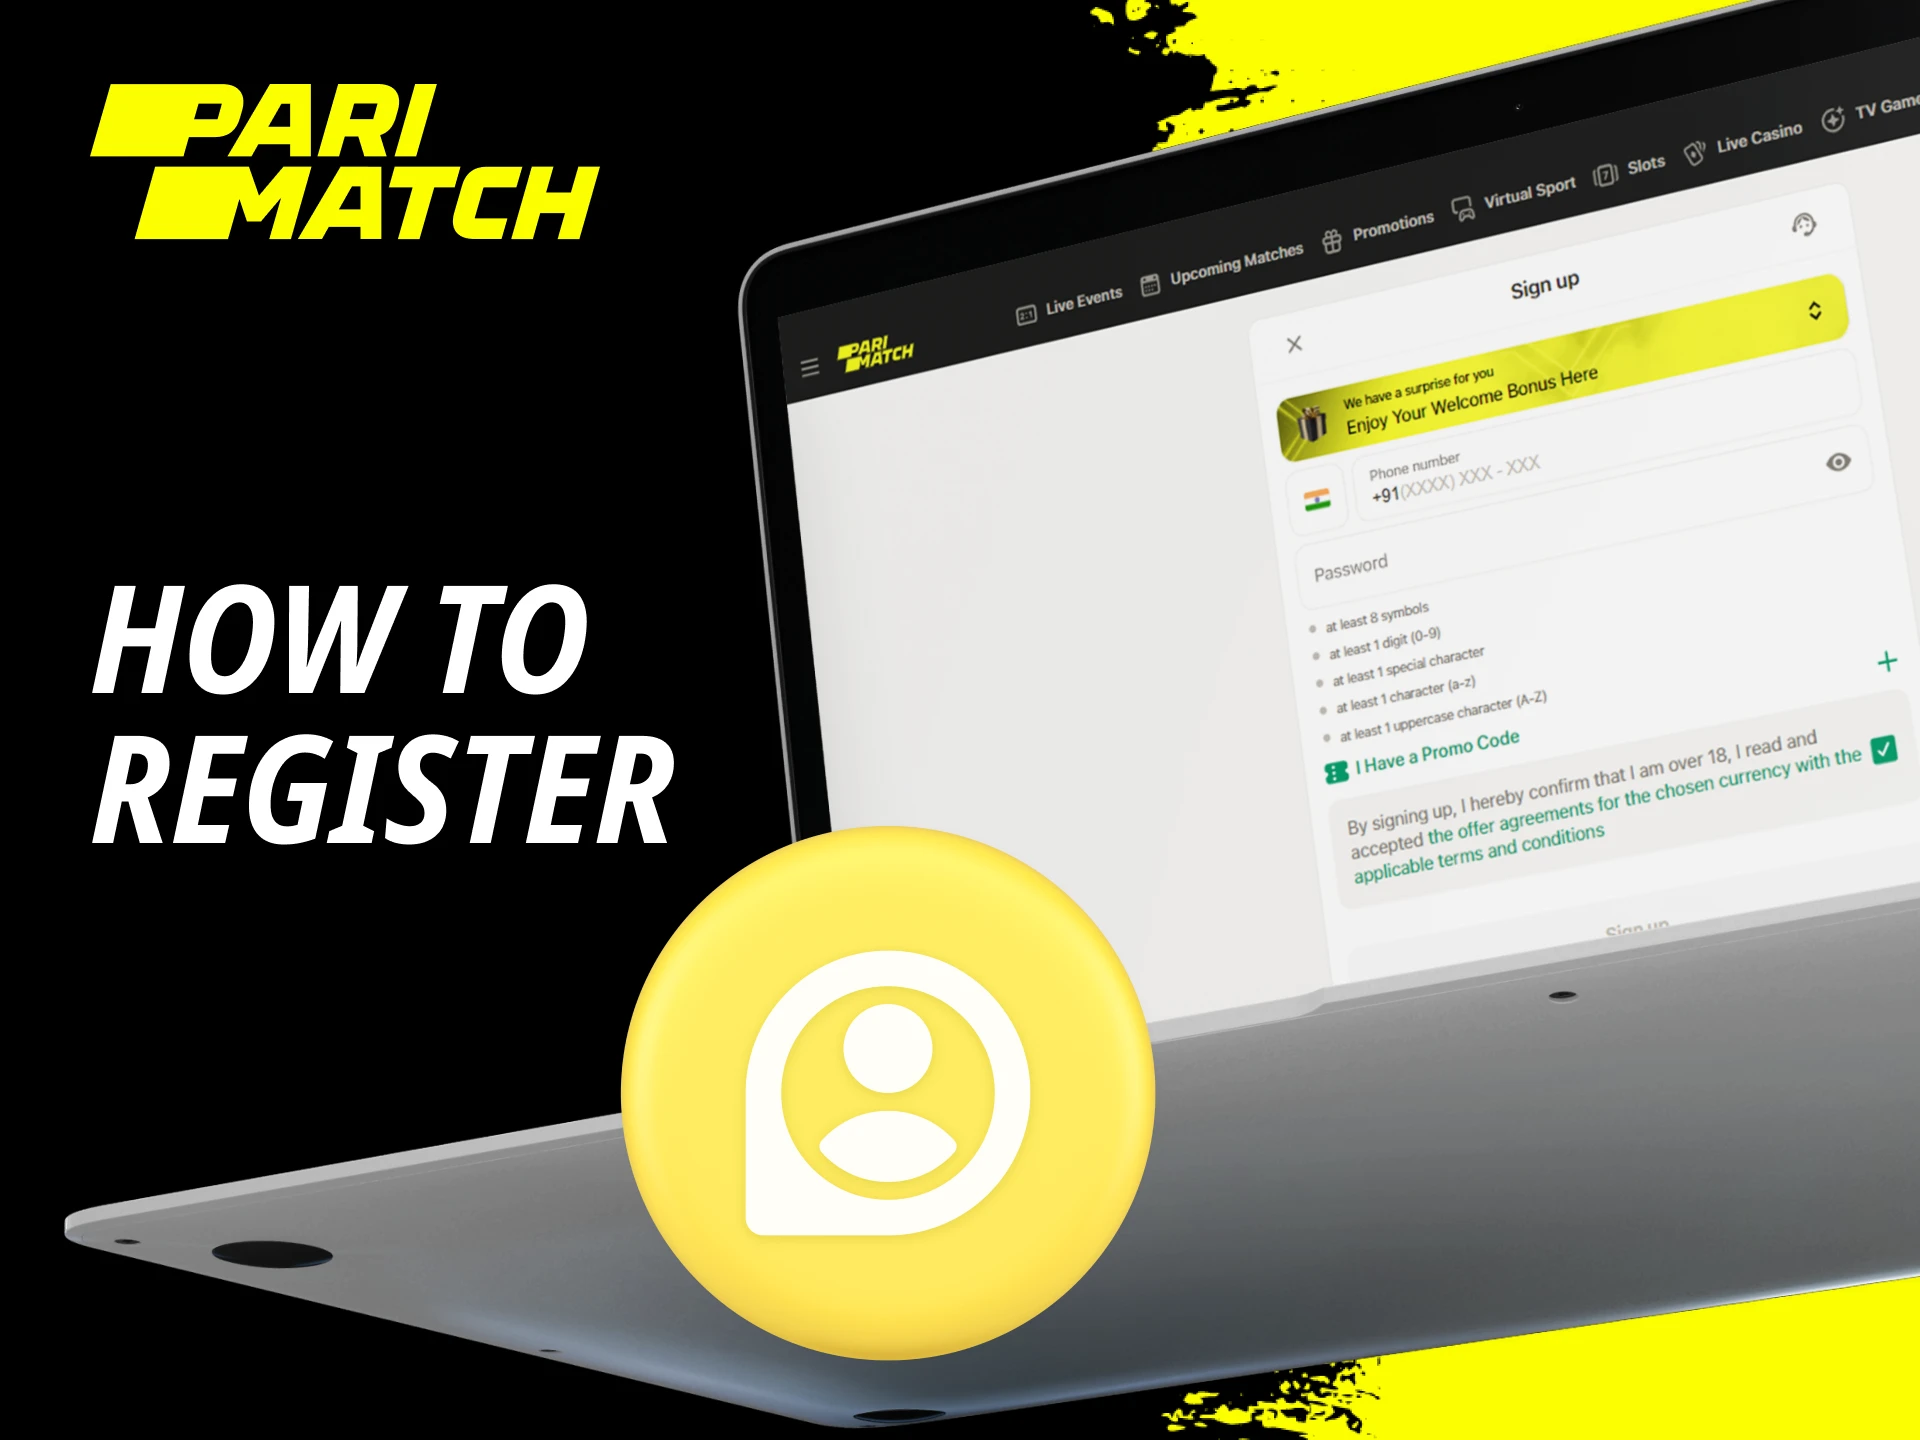 Instructions for users on how to create a new account on the Parimatch online casino website.